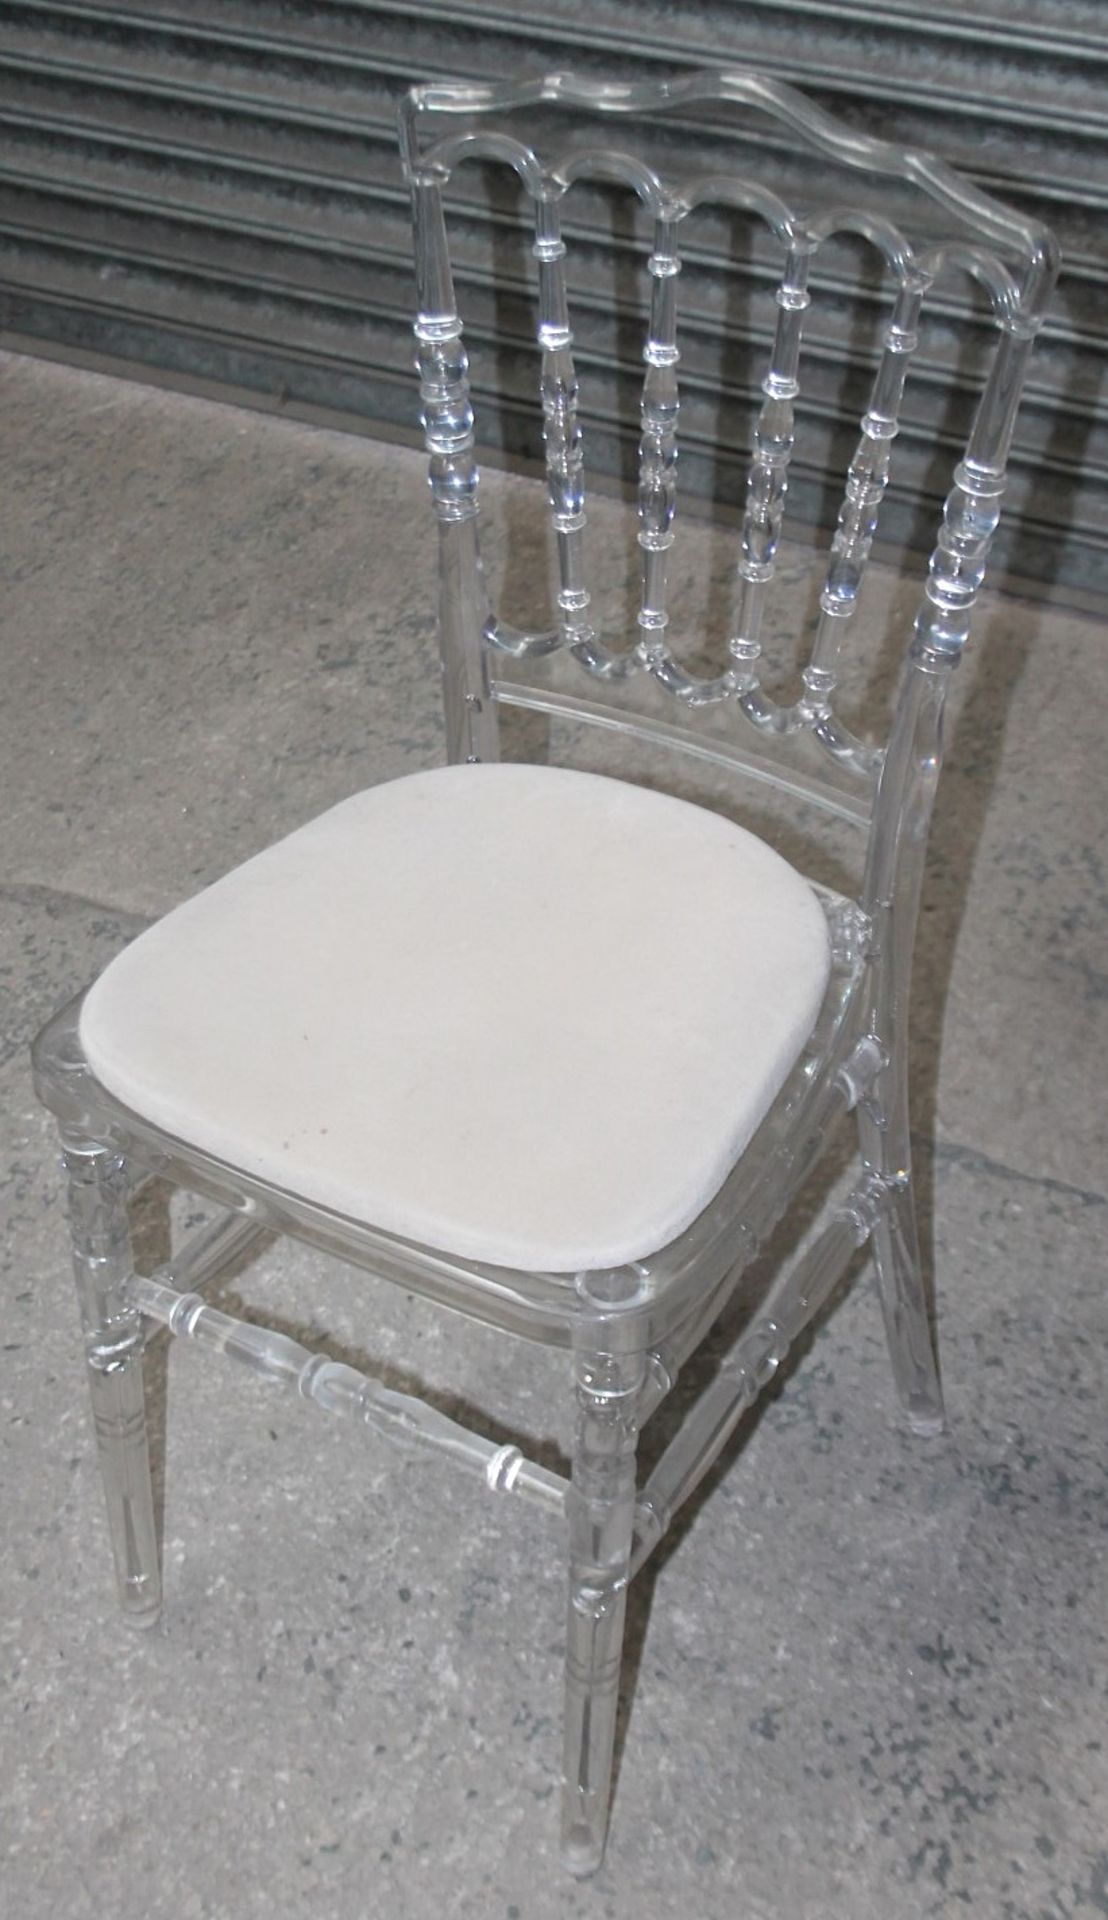 10 x High Quality Clear Acrylic Spindle Back Commercial Dining Chairs With Removable Seat Pads - Image 5 of 10